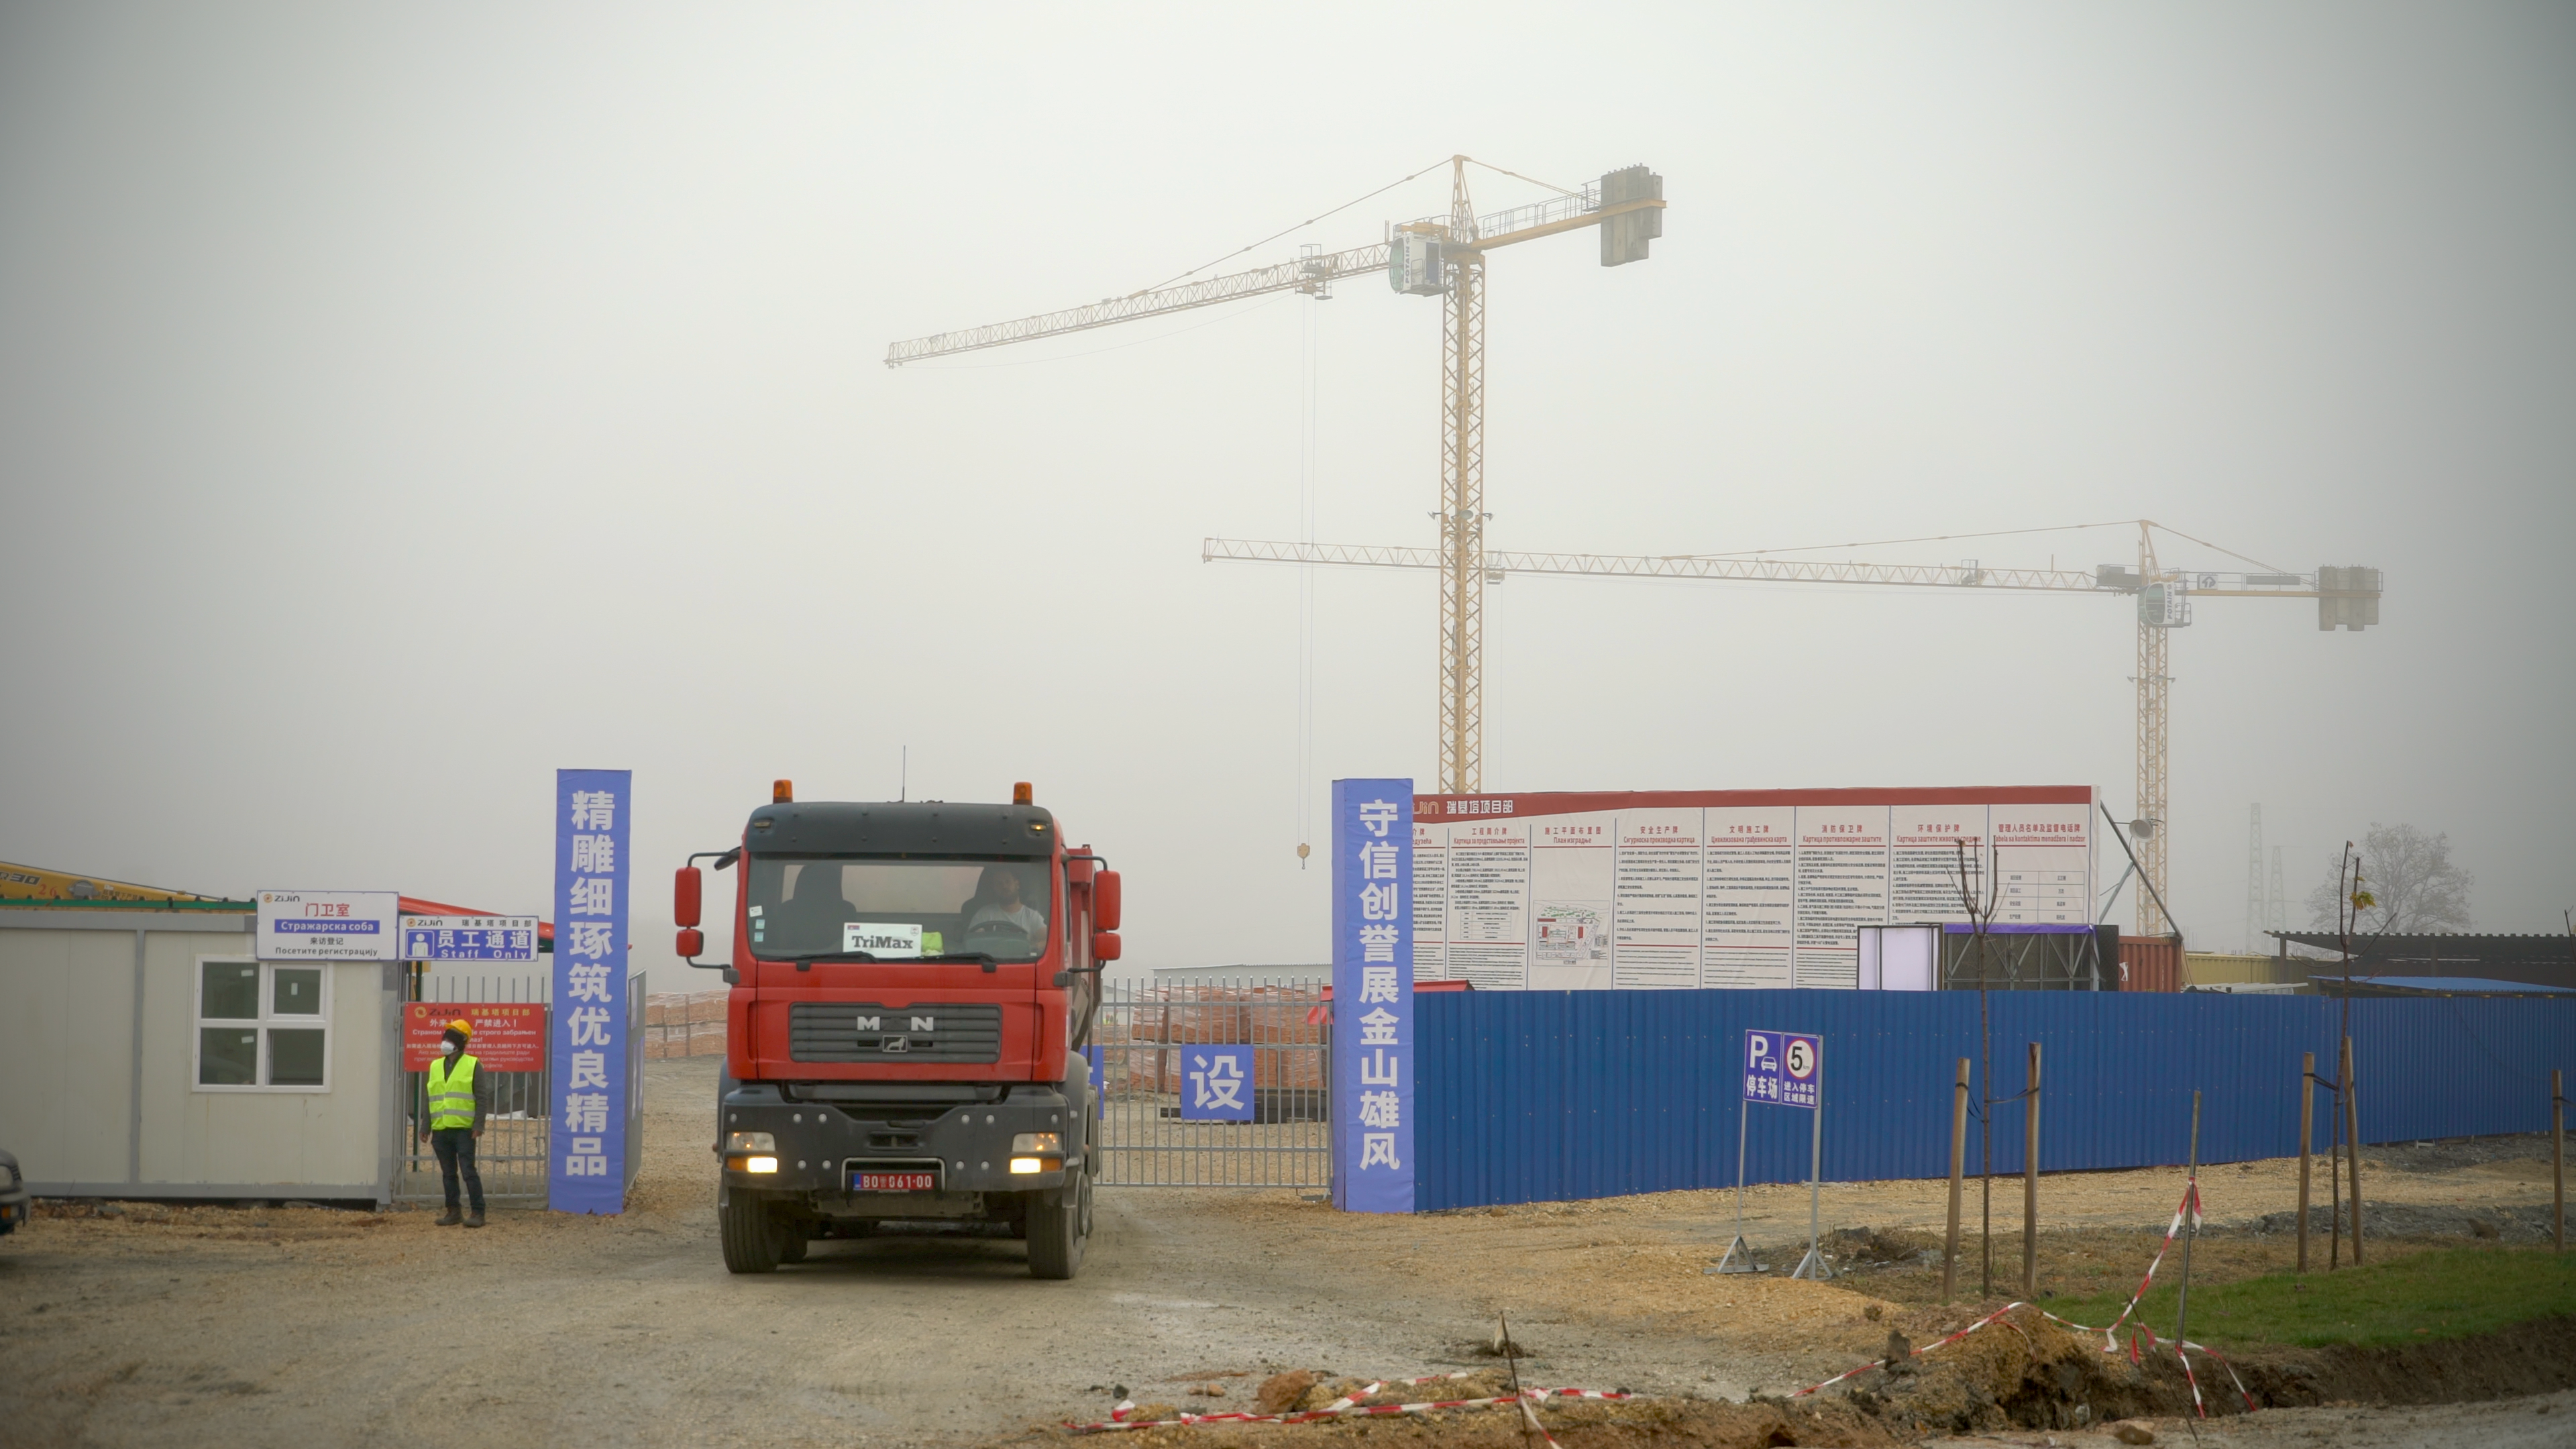  In 2018, the Chinese state-owned enterprise Zinjin purchased the RTB Bor copper mine and began to rapidly expand excavation.